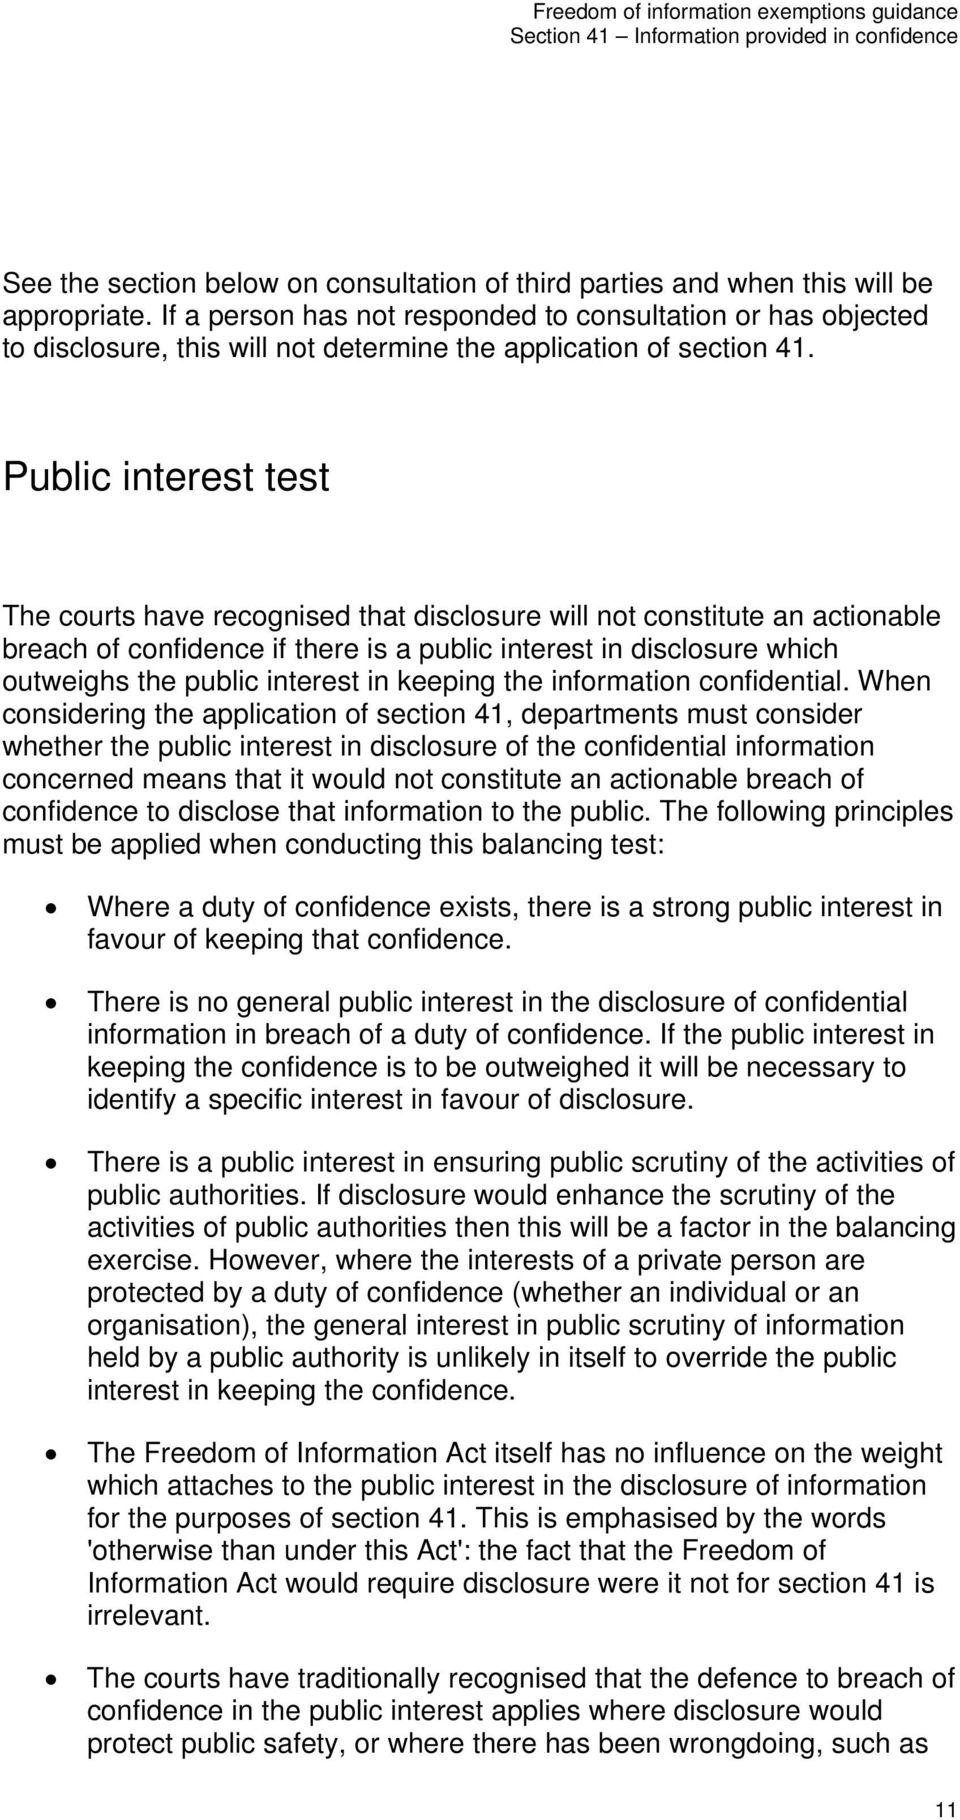 Public interest test The courts have recognised that disclosure will not constitute an actionable breach of confidence if there is a public interest in disclosure which outweighs the public interest